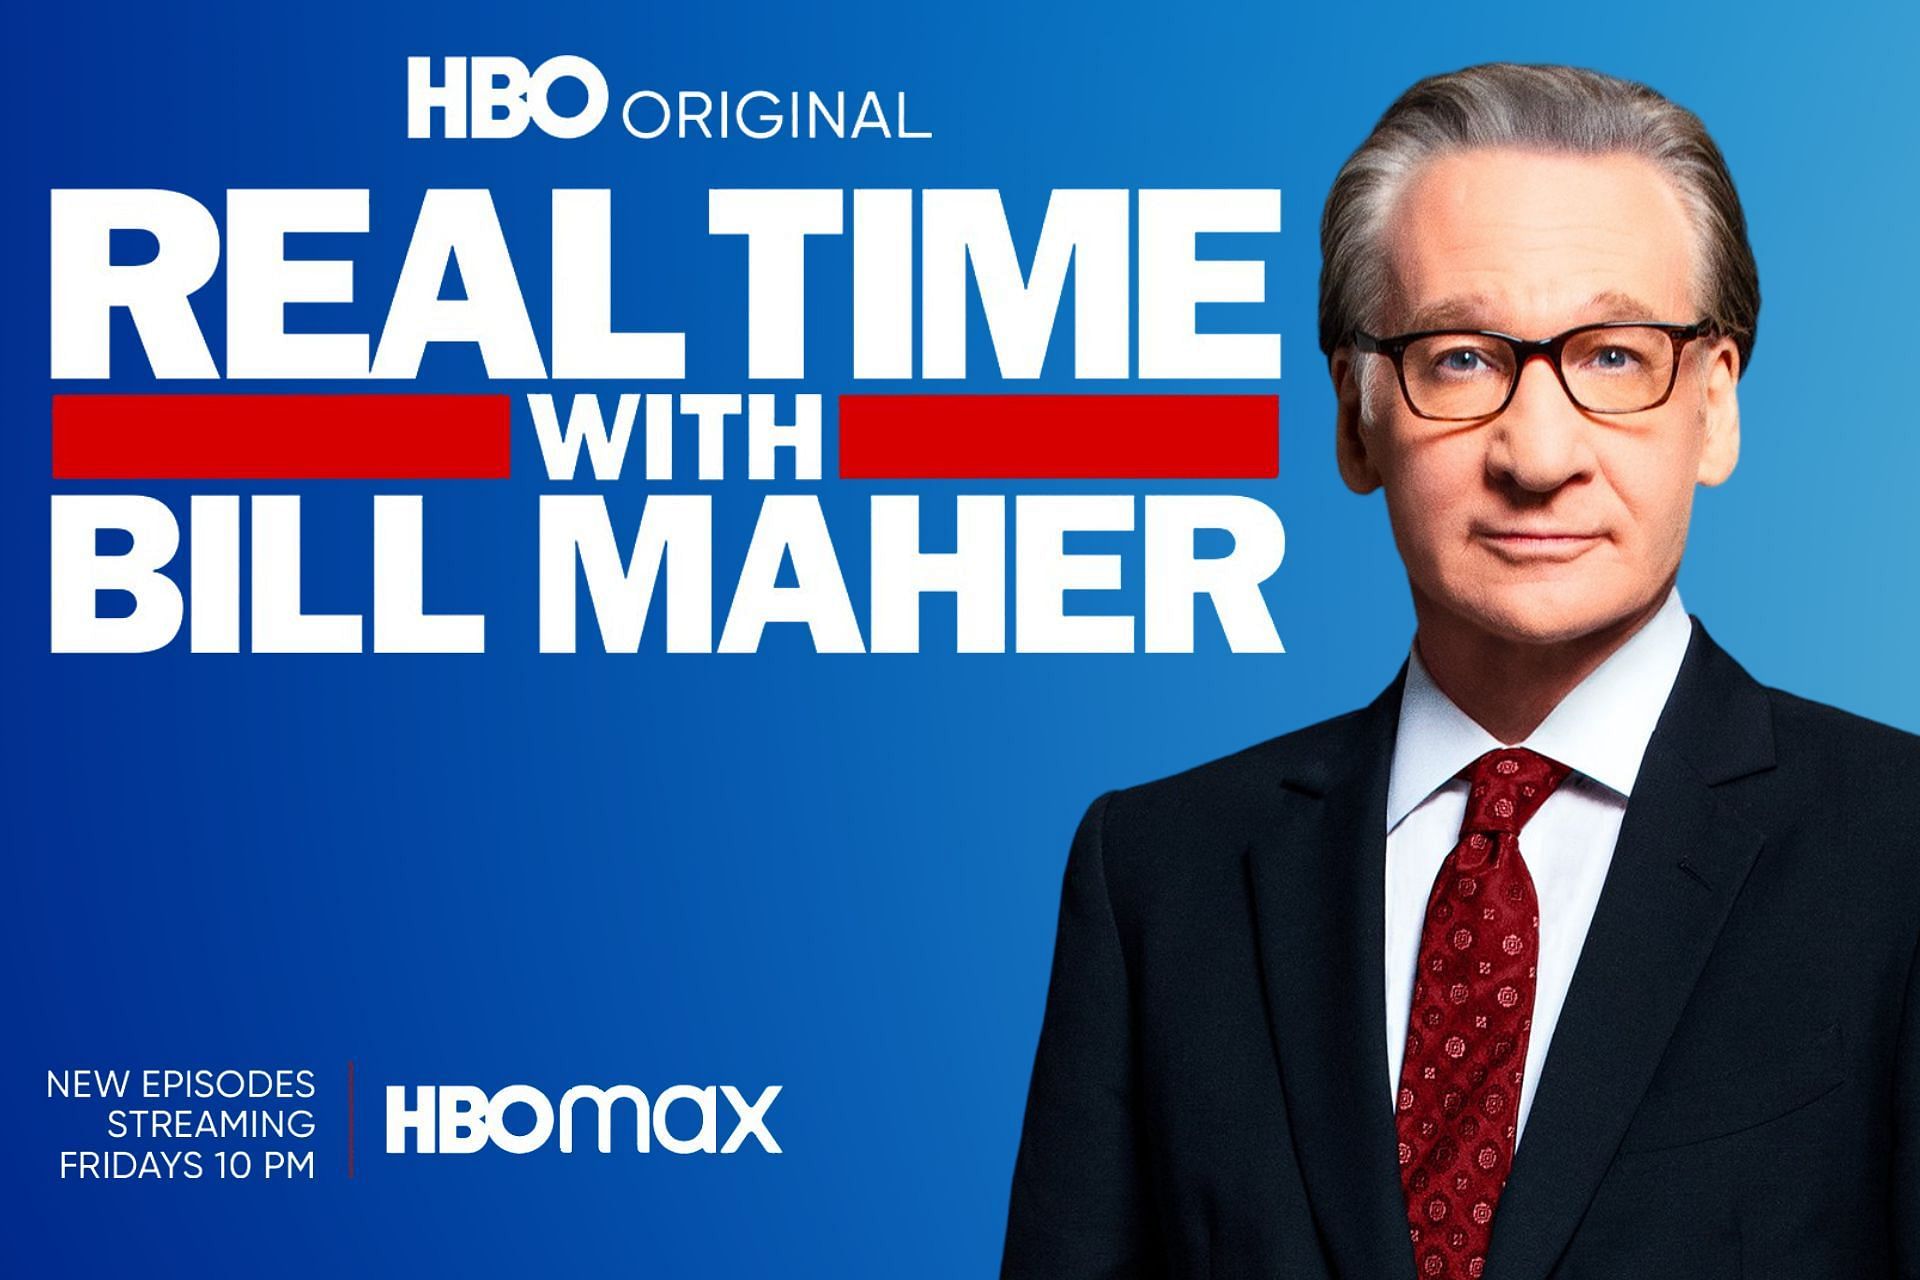 Real Time with Bill Maher Season 21 Episode 3 guests revealed (Image via Twitter/@RealTimers)